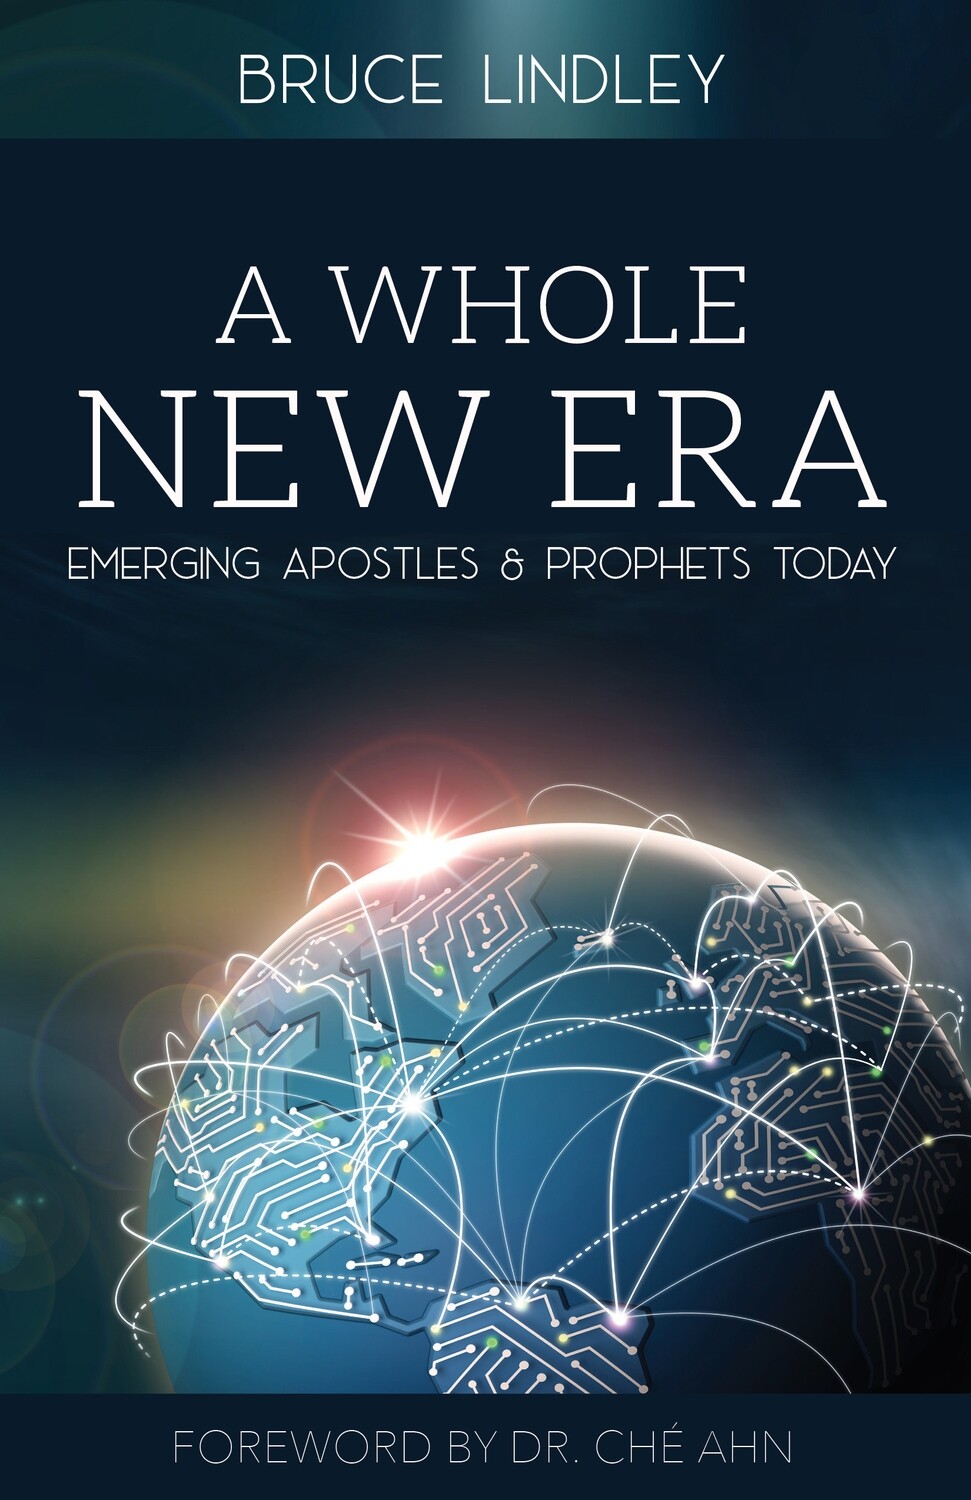 Bruce Lindley's
"A Whole New Era - Emerging Apostles & Prophets Today" - Forward by Dr. Che Ahn